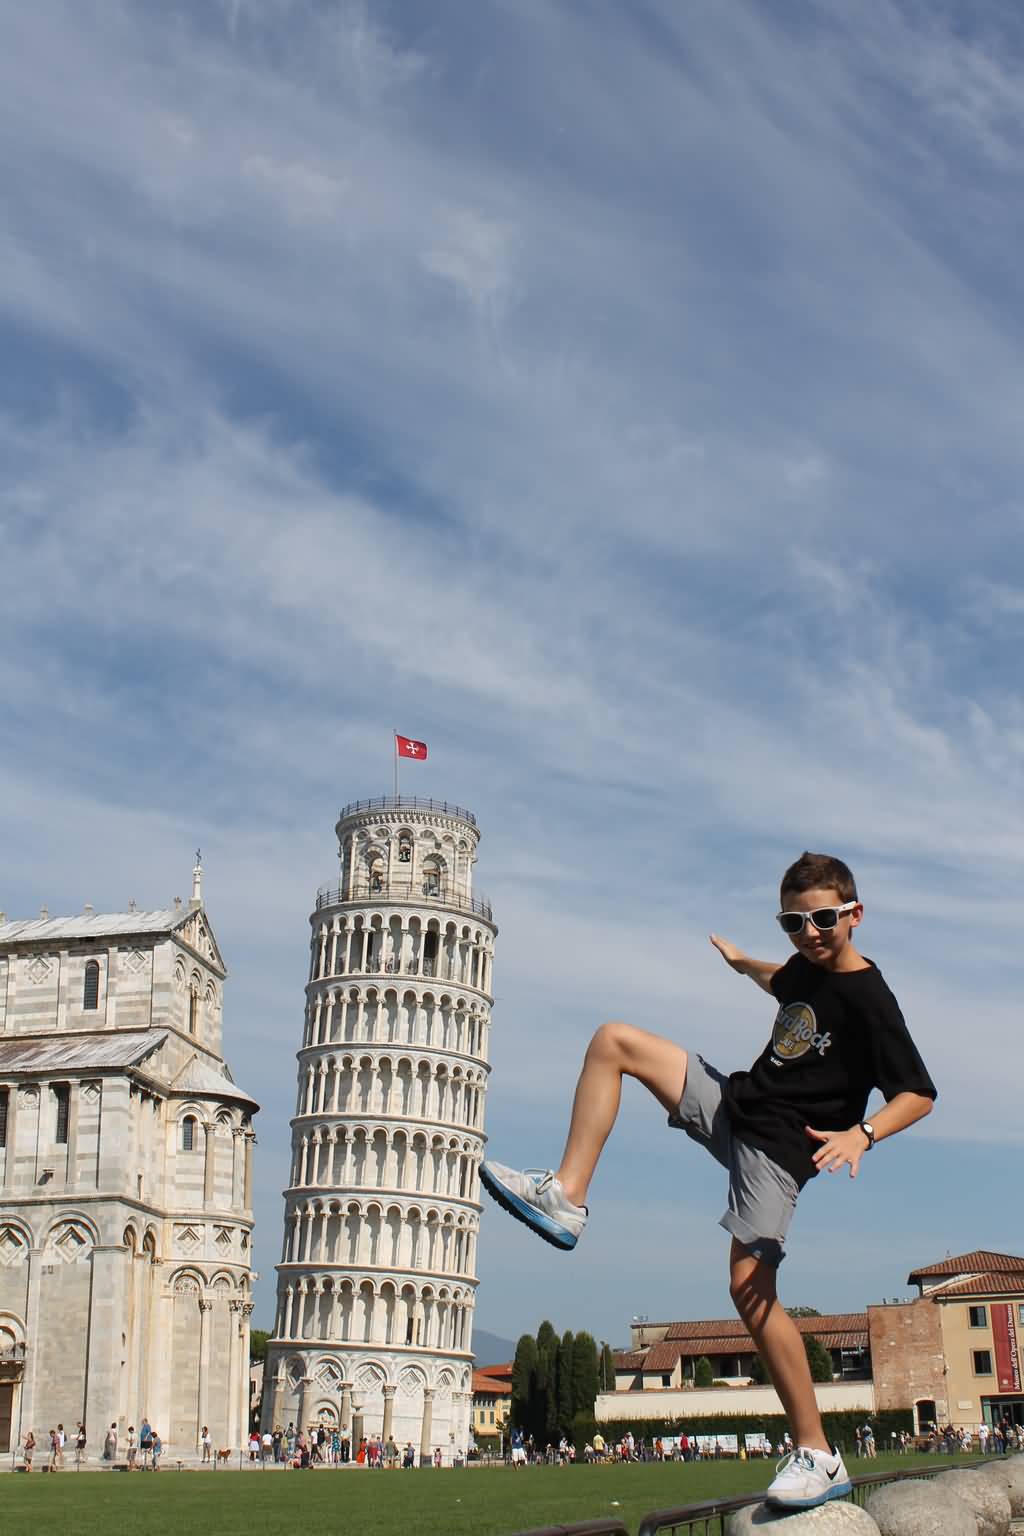 Hitting The Leaning Tower With Leg Optical Illusion